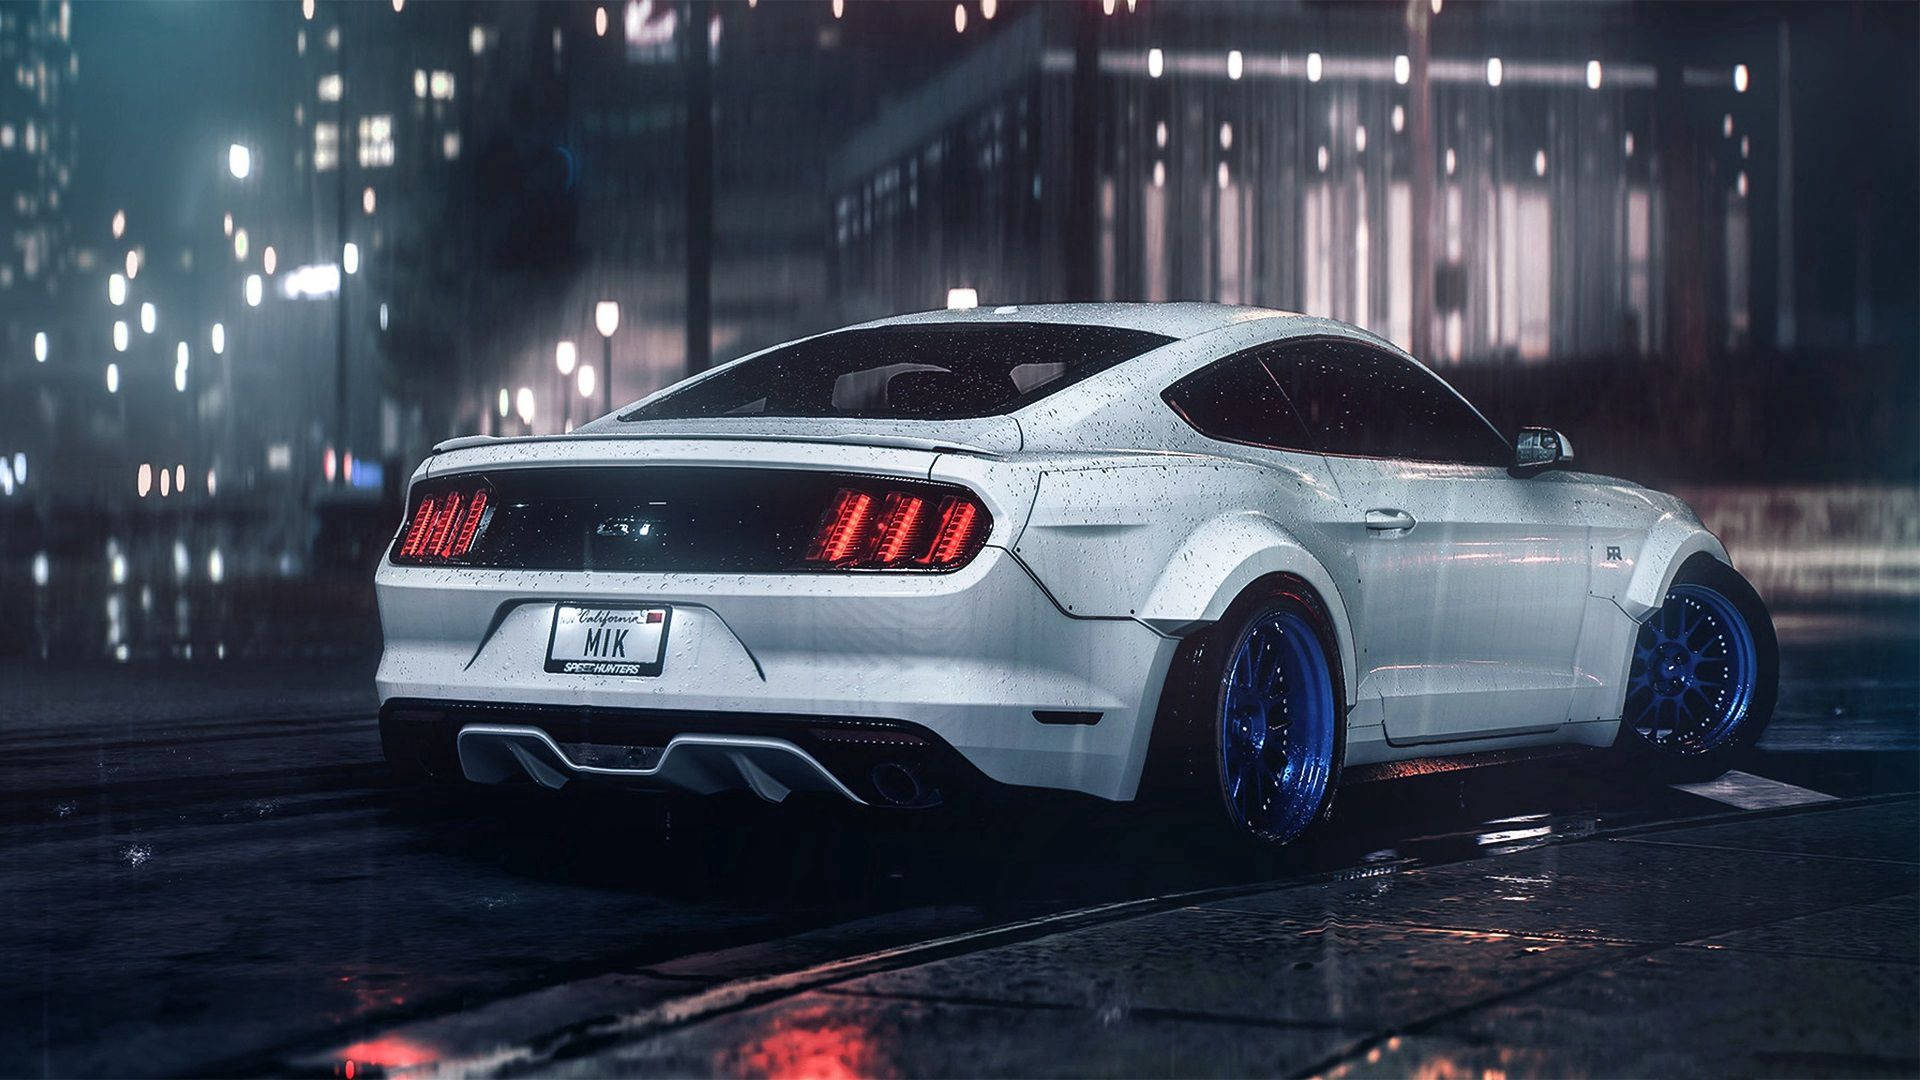 White Ford Mustang Gt 2016 Background